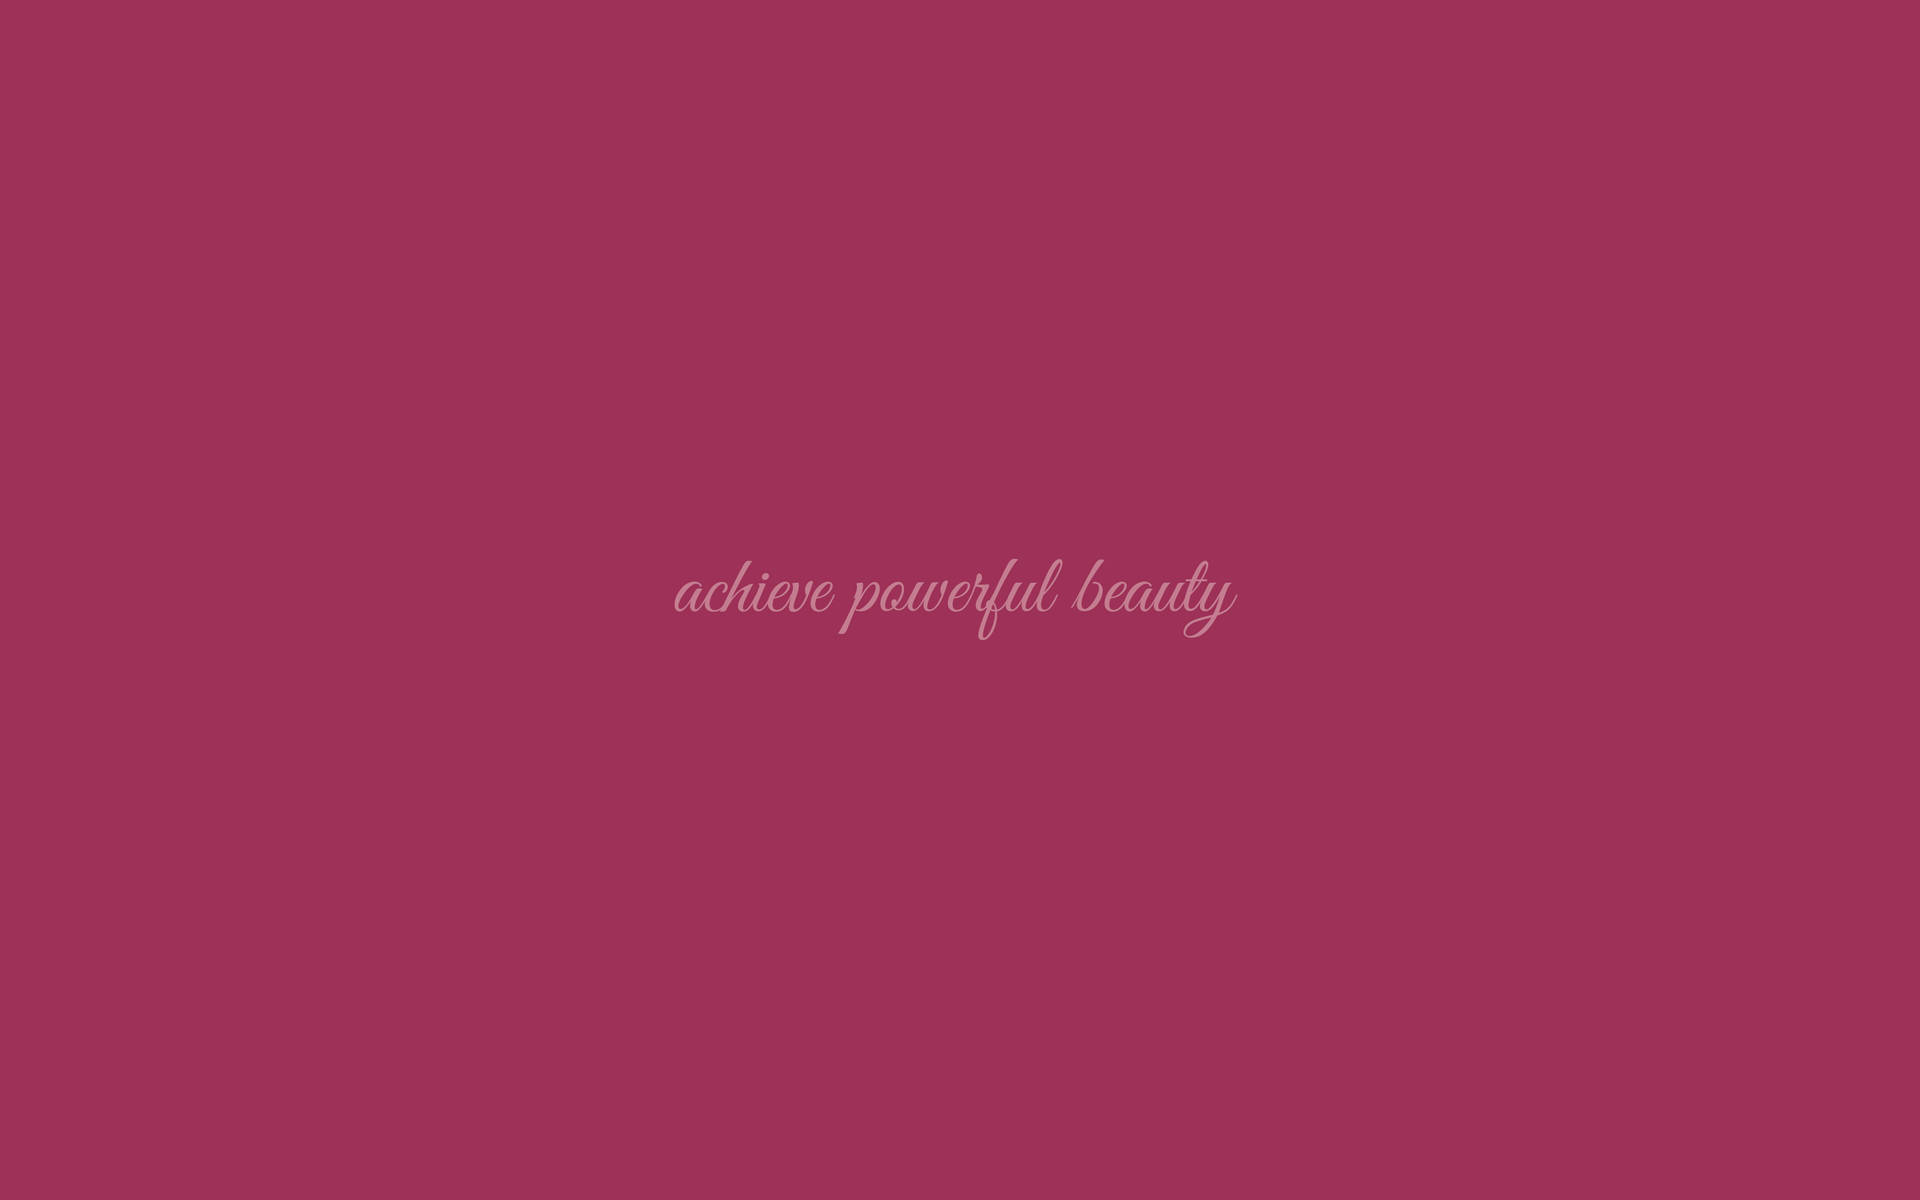 Red Aesthetic Beauty Quote Background